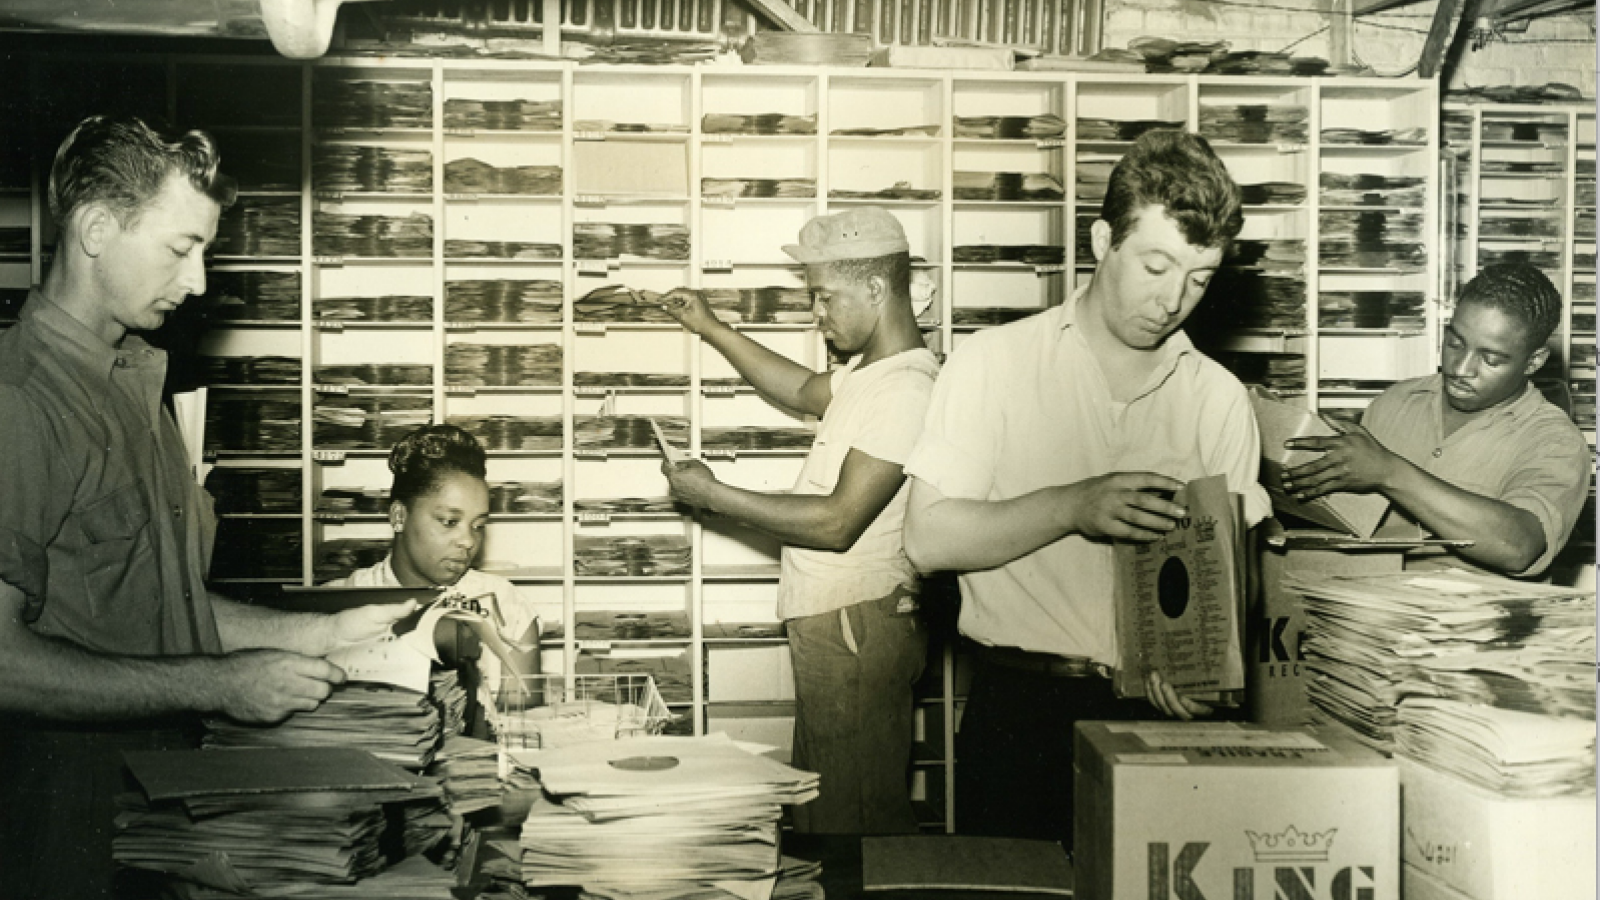 Five King Records employees sorting records